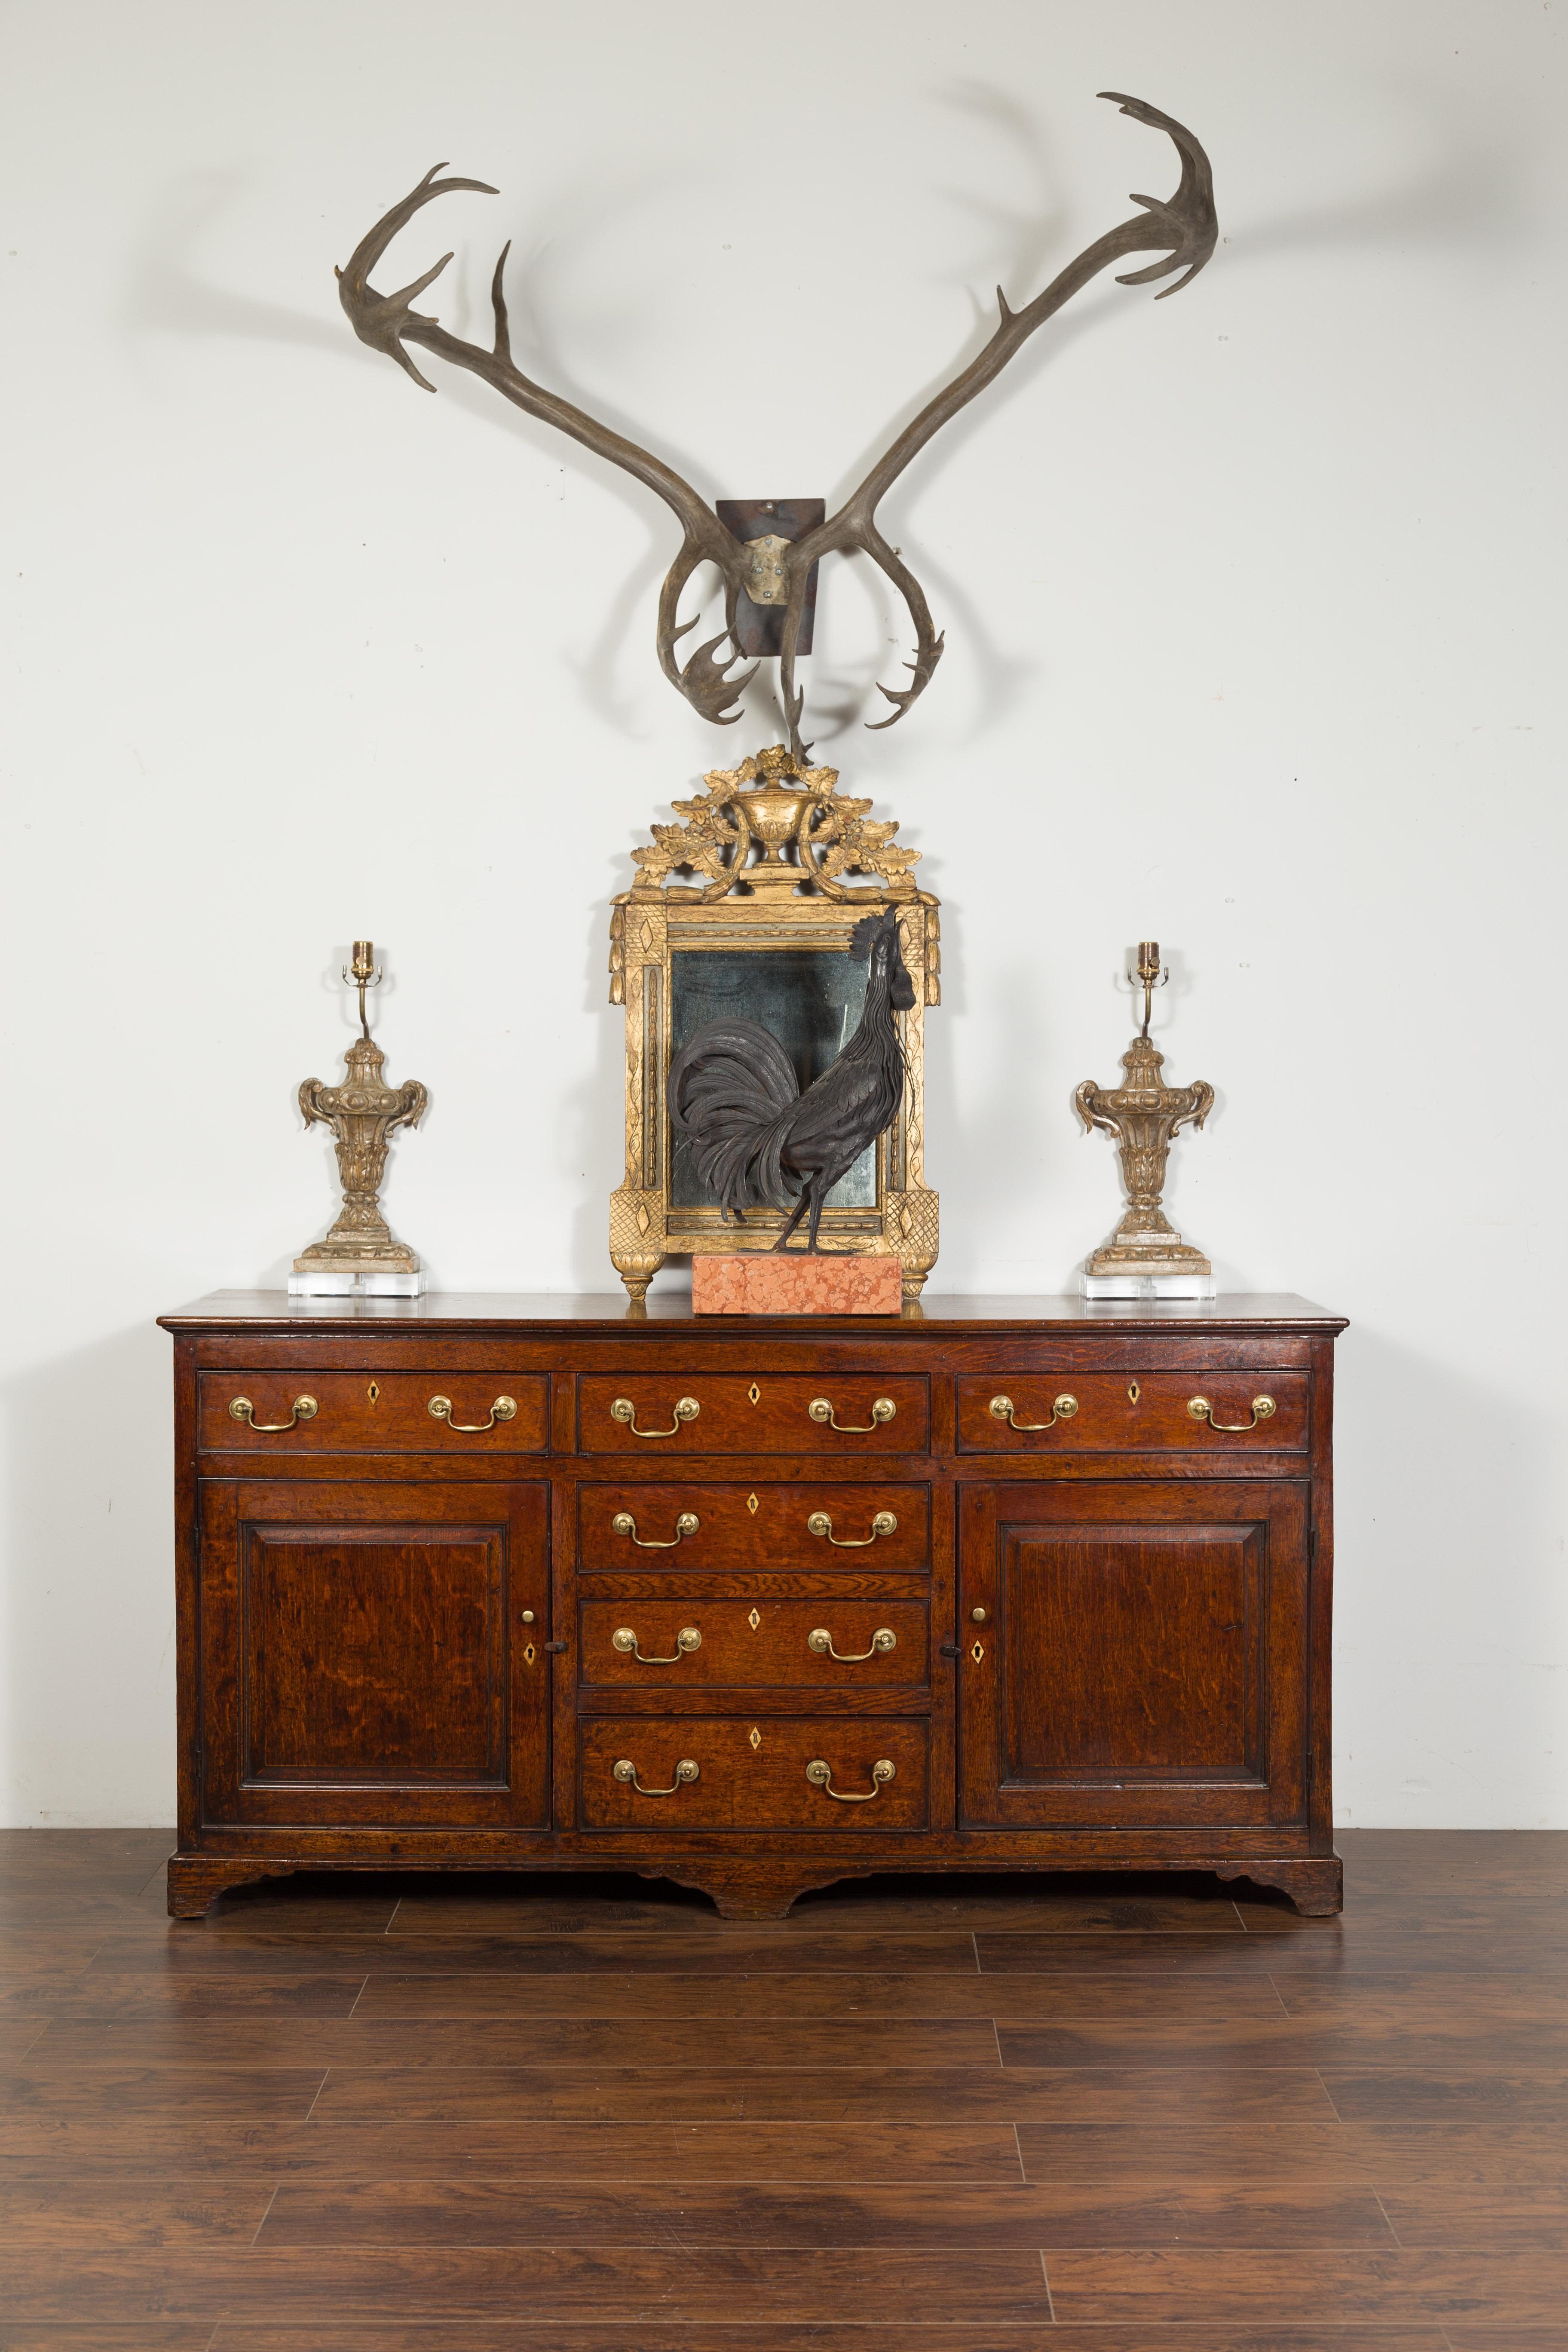 An English oak dresser base / server from the mid-19th century, with brass hardware and bone inlay. Created in England during the 1850s, this oak dresser base / server features a rectangular top sitting above a perfectly organized façade. Six